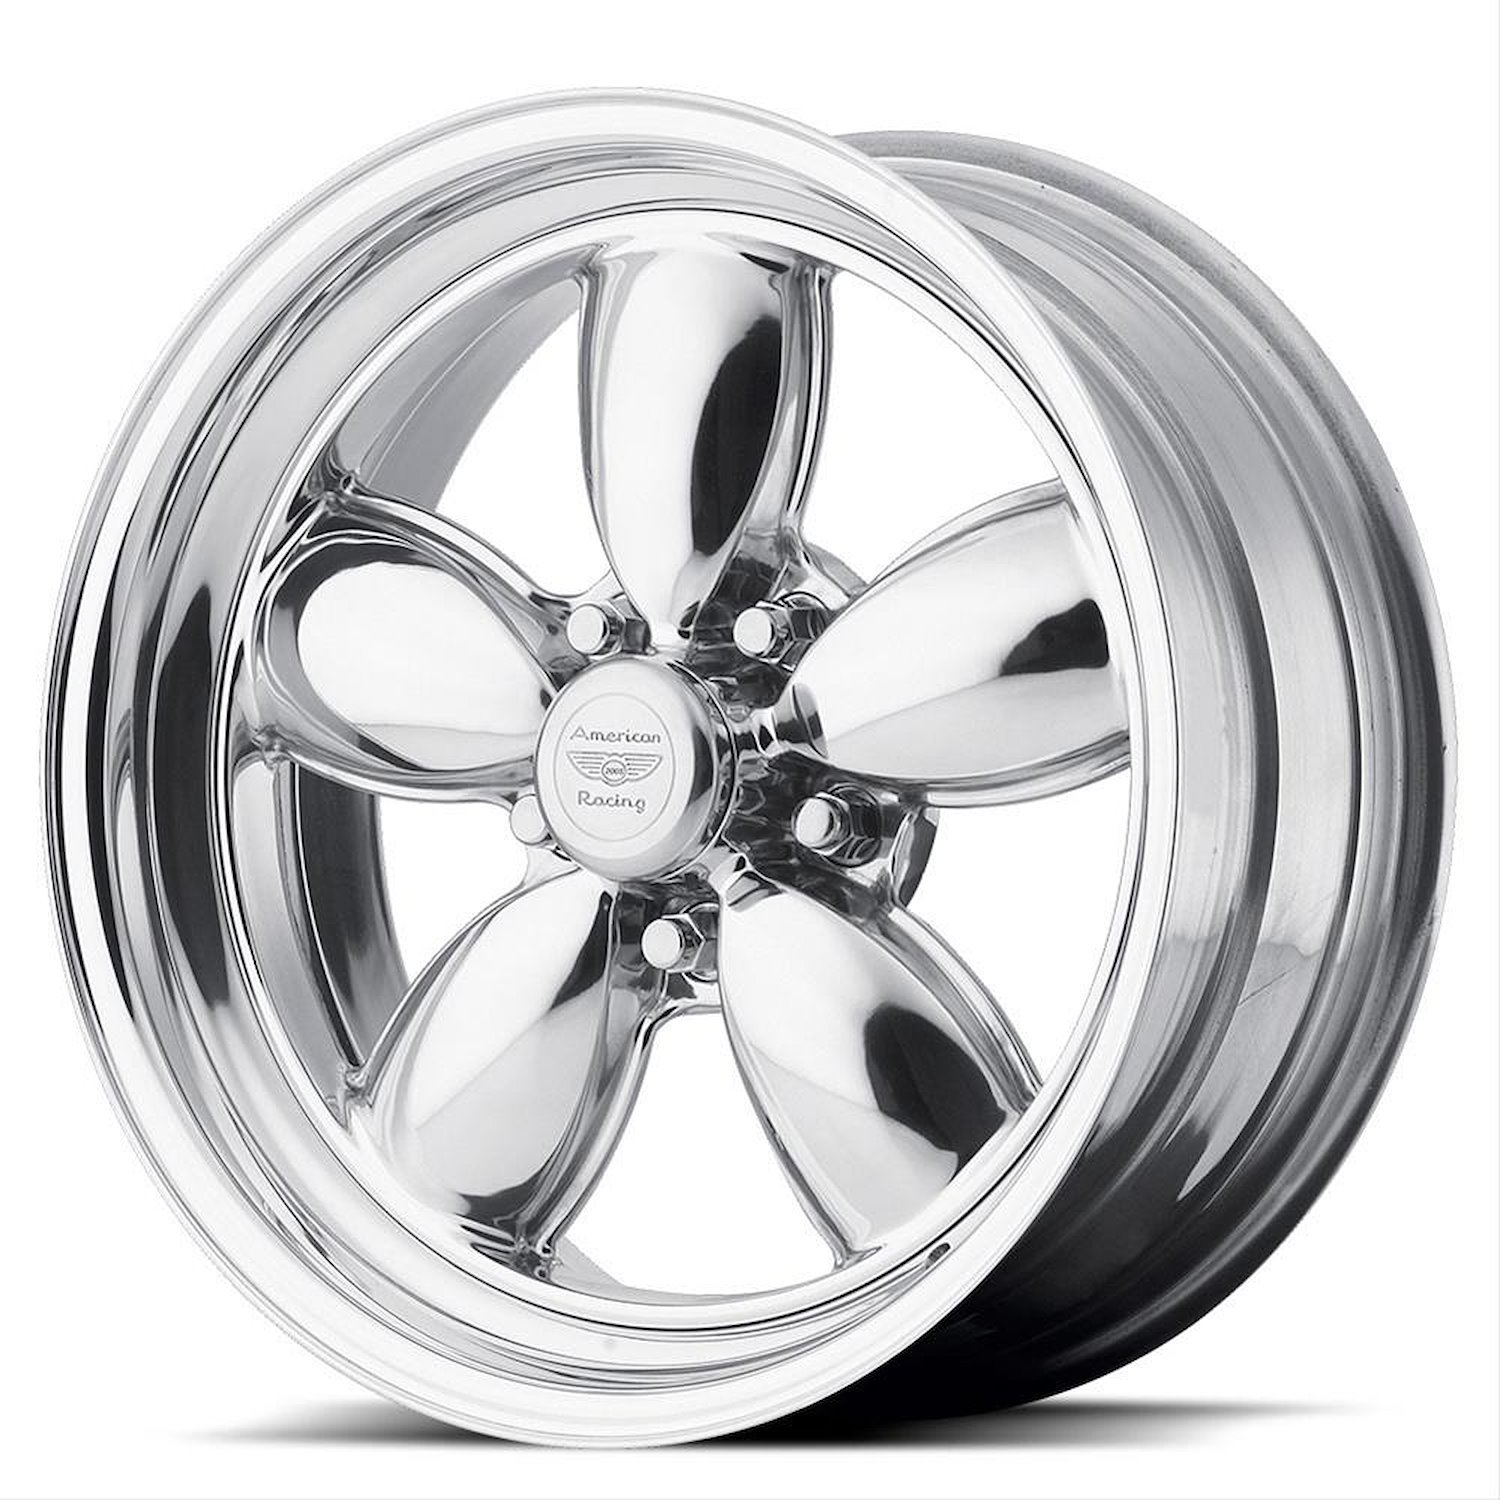 AMERICAN RACING CLASSIC 200S TWO-PIECE POLISHED 15 x 7 5X5.0 -13 3.49